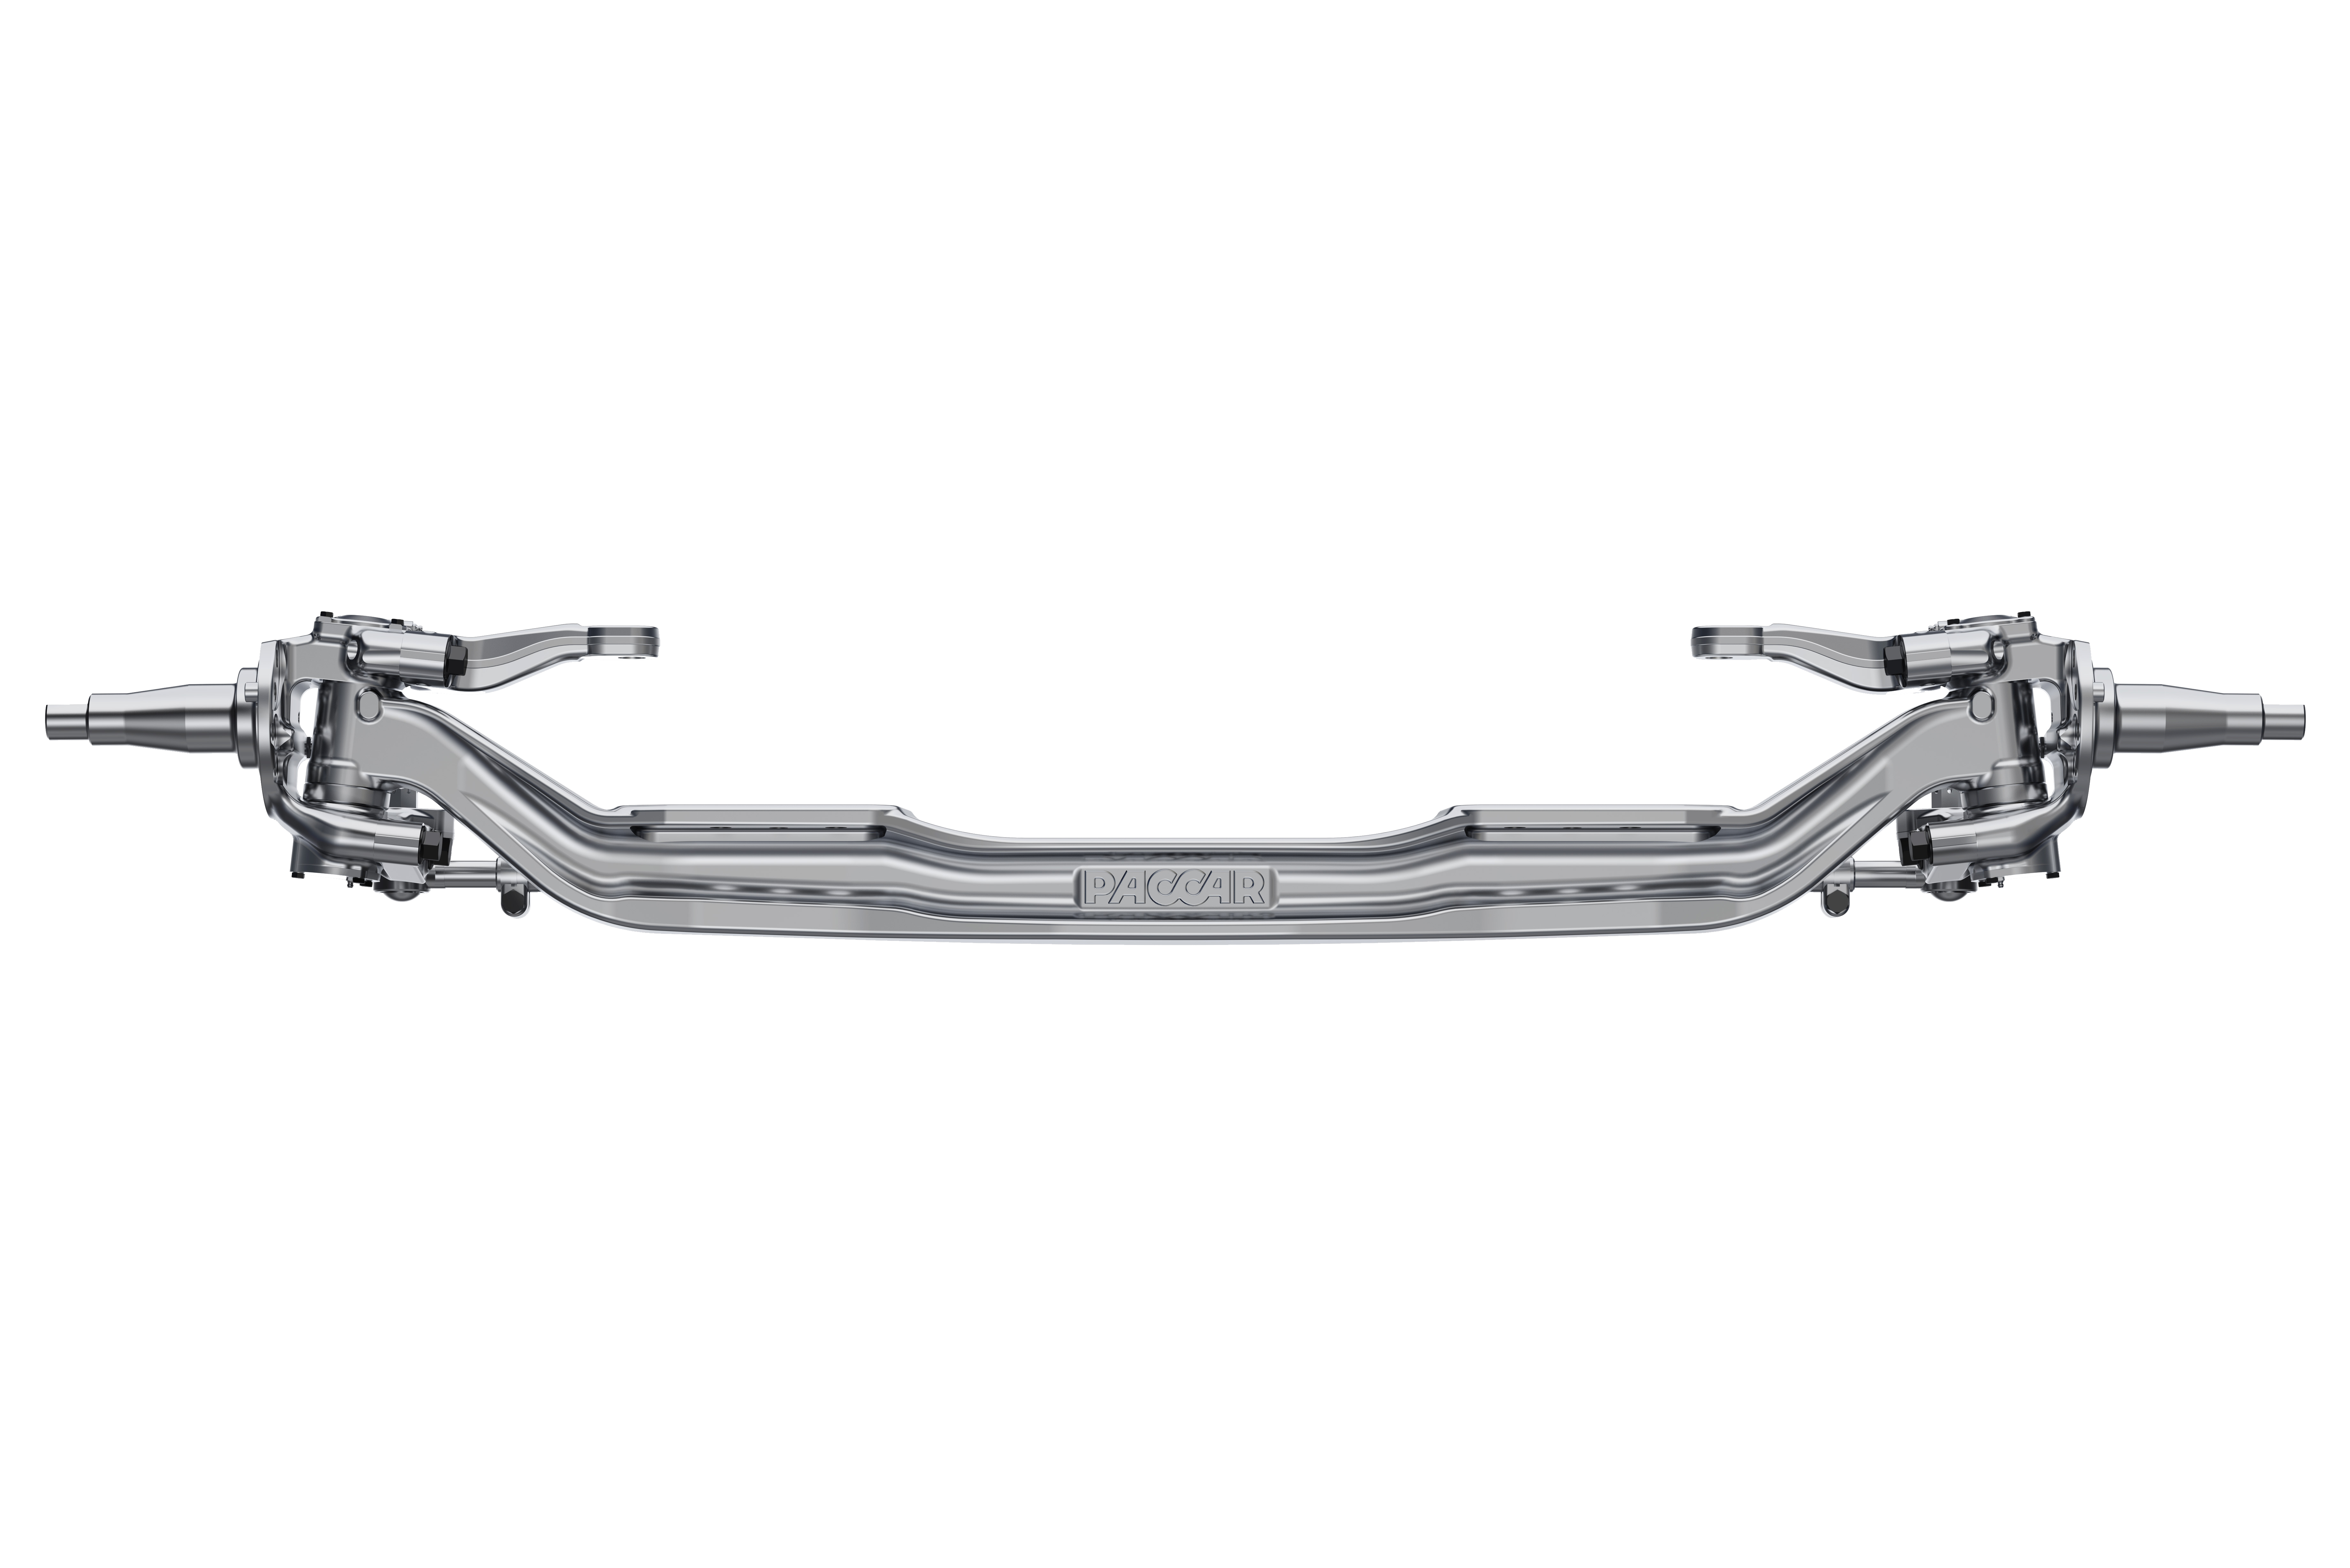 Peterbilt adds Paccar wide-track steer axles to truck line